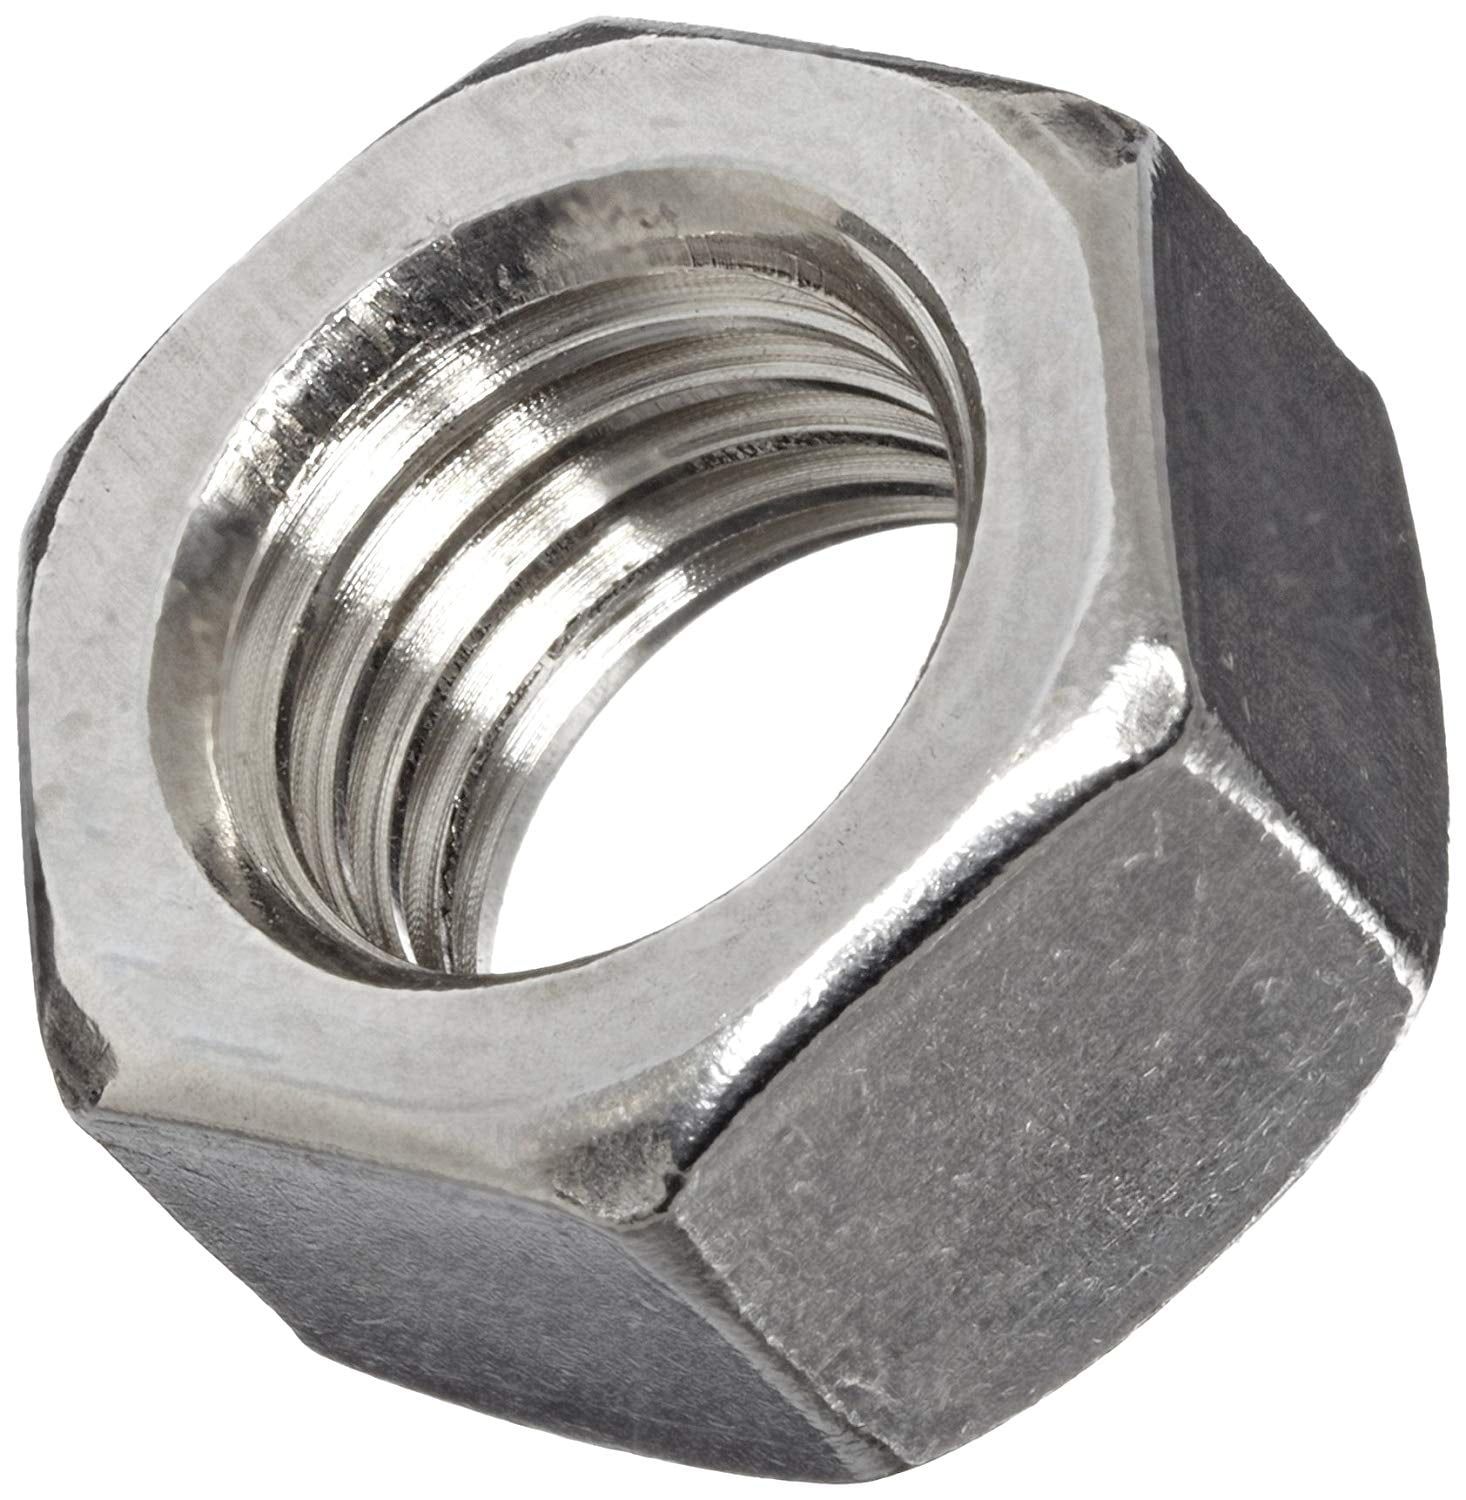 Details about   Hex Nuts 1/4-20 Grade 2 